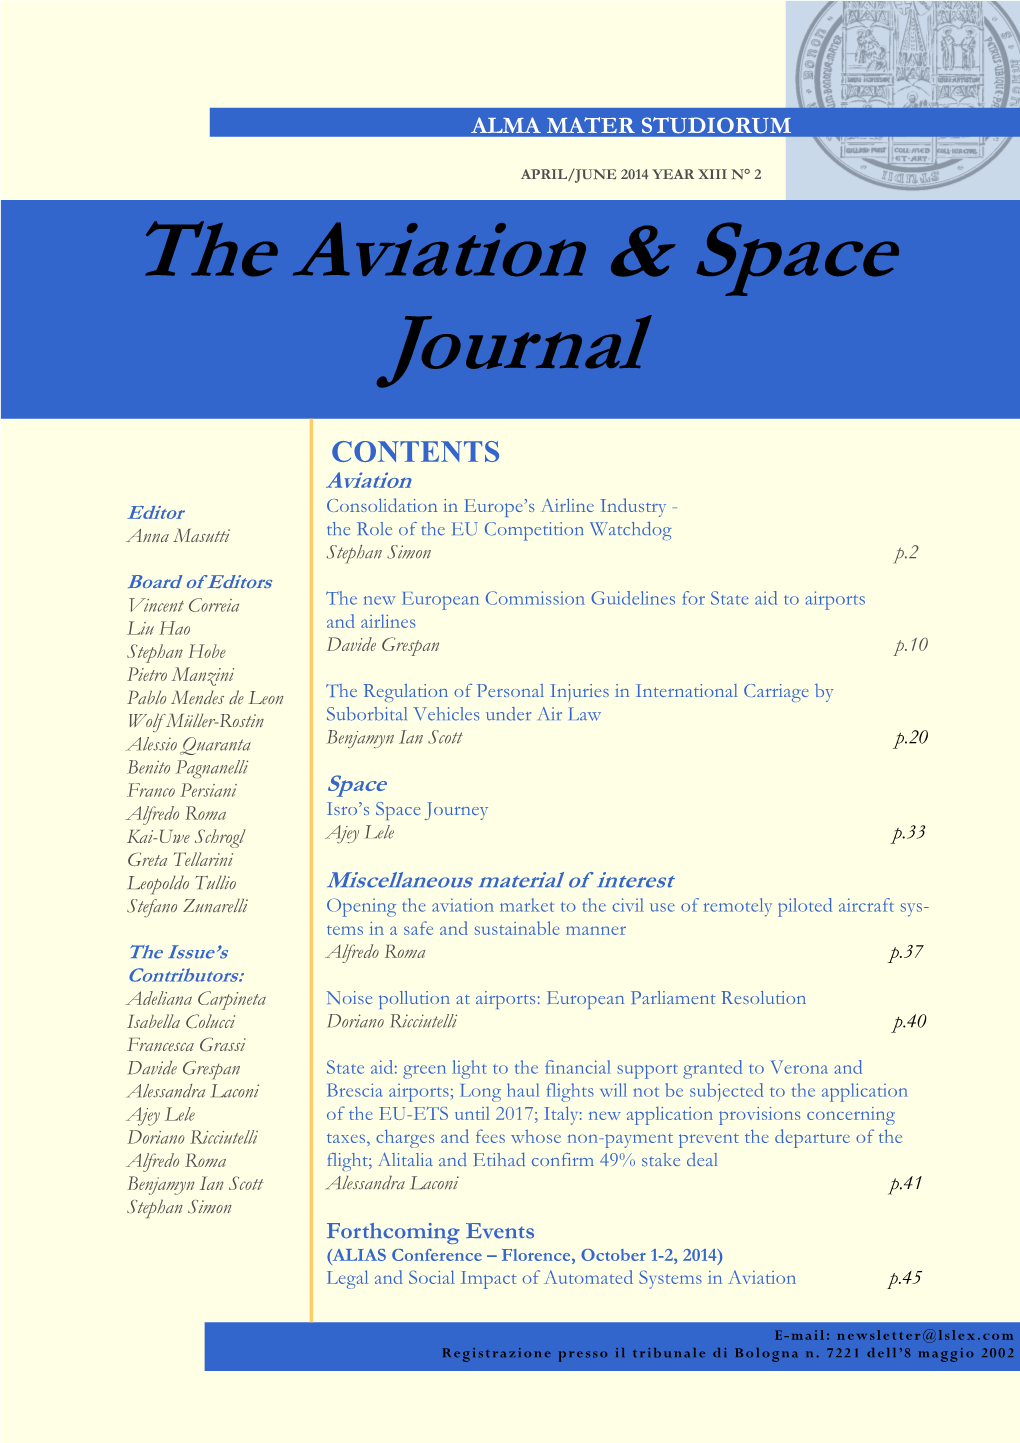 The Aviation & Space Journal Year XIII No 2 April